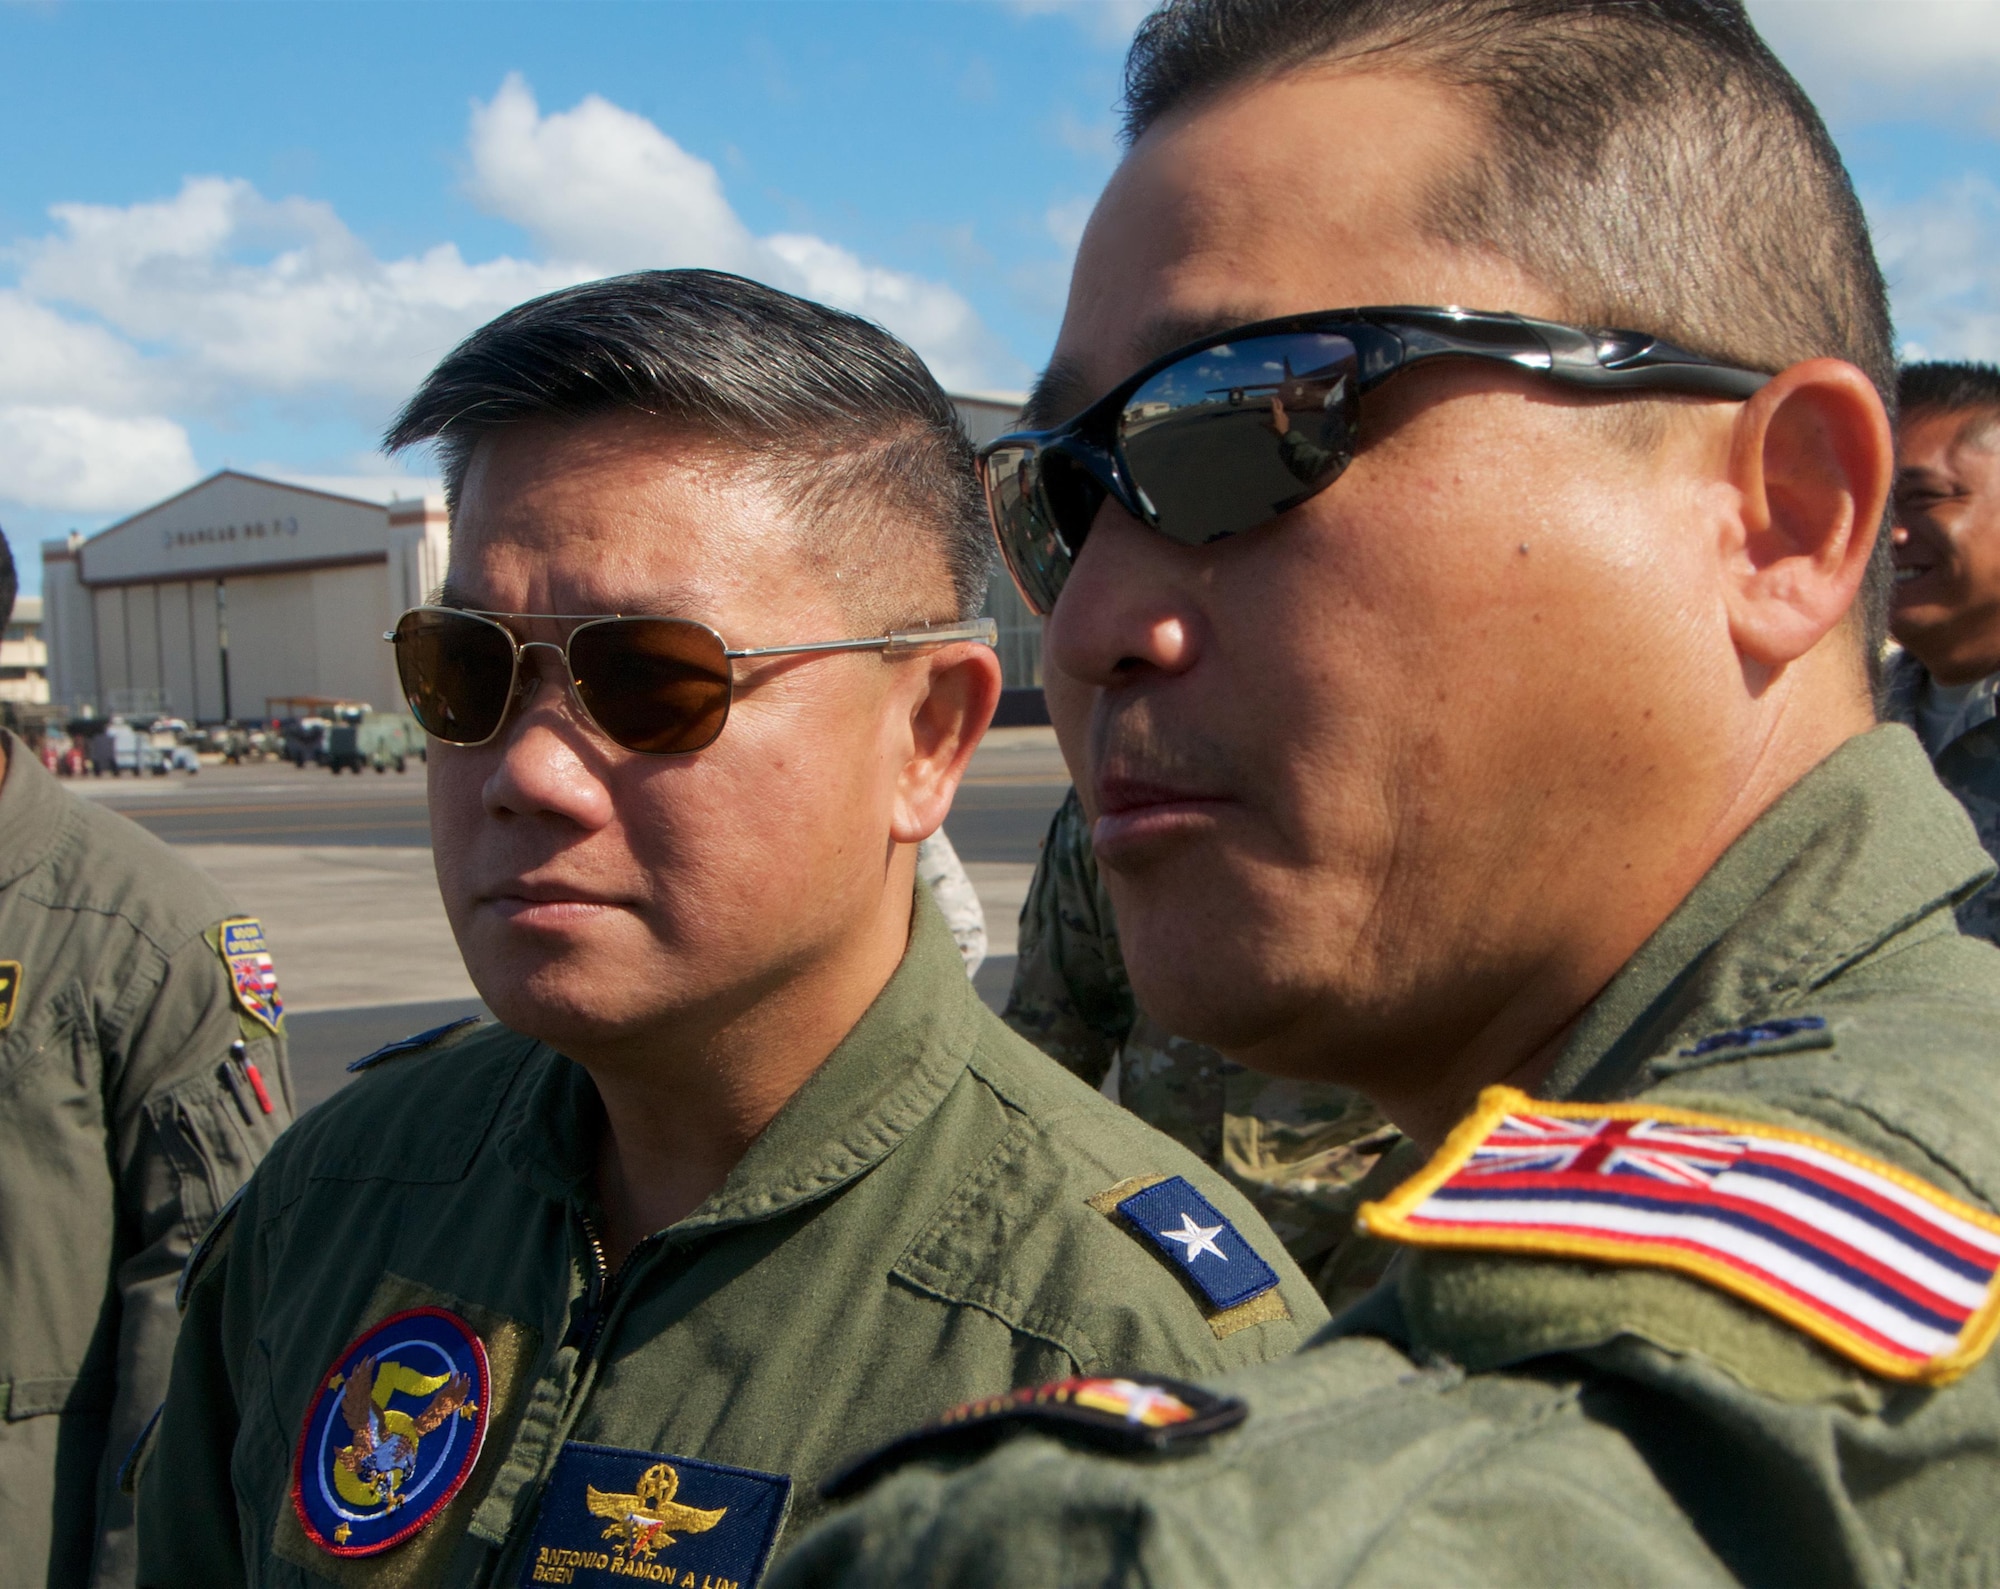 Philippine Air Force Brig. Gen. Antonio Ramon Lim, commander, 5th Fighter Wing, PAF and U.S. Air Force Lt. Col. Scott Oka, commander, 203rd Air Refueling Squadron, Hawaii Air National Guard discuss the capabilities of the KC-135 Stratotanker